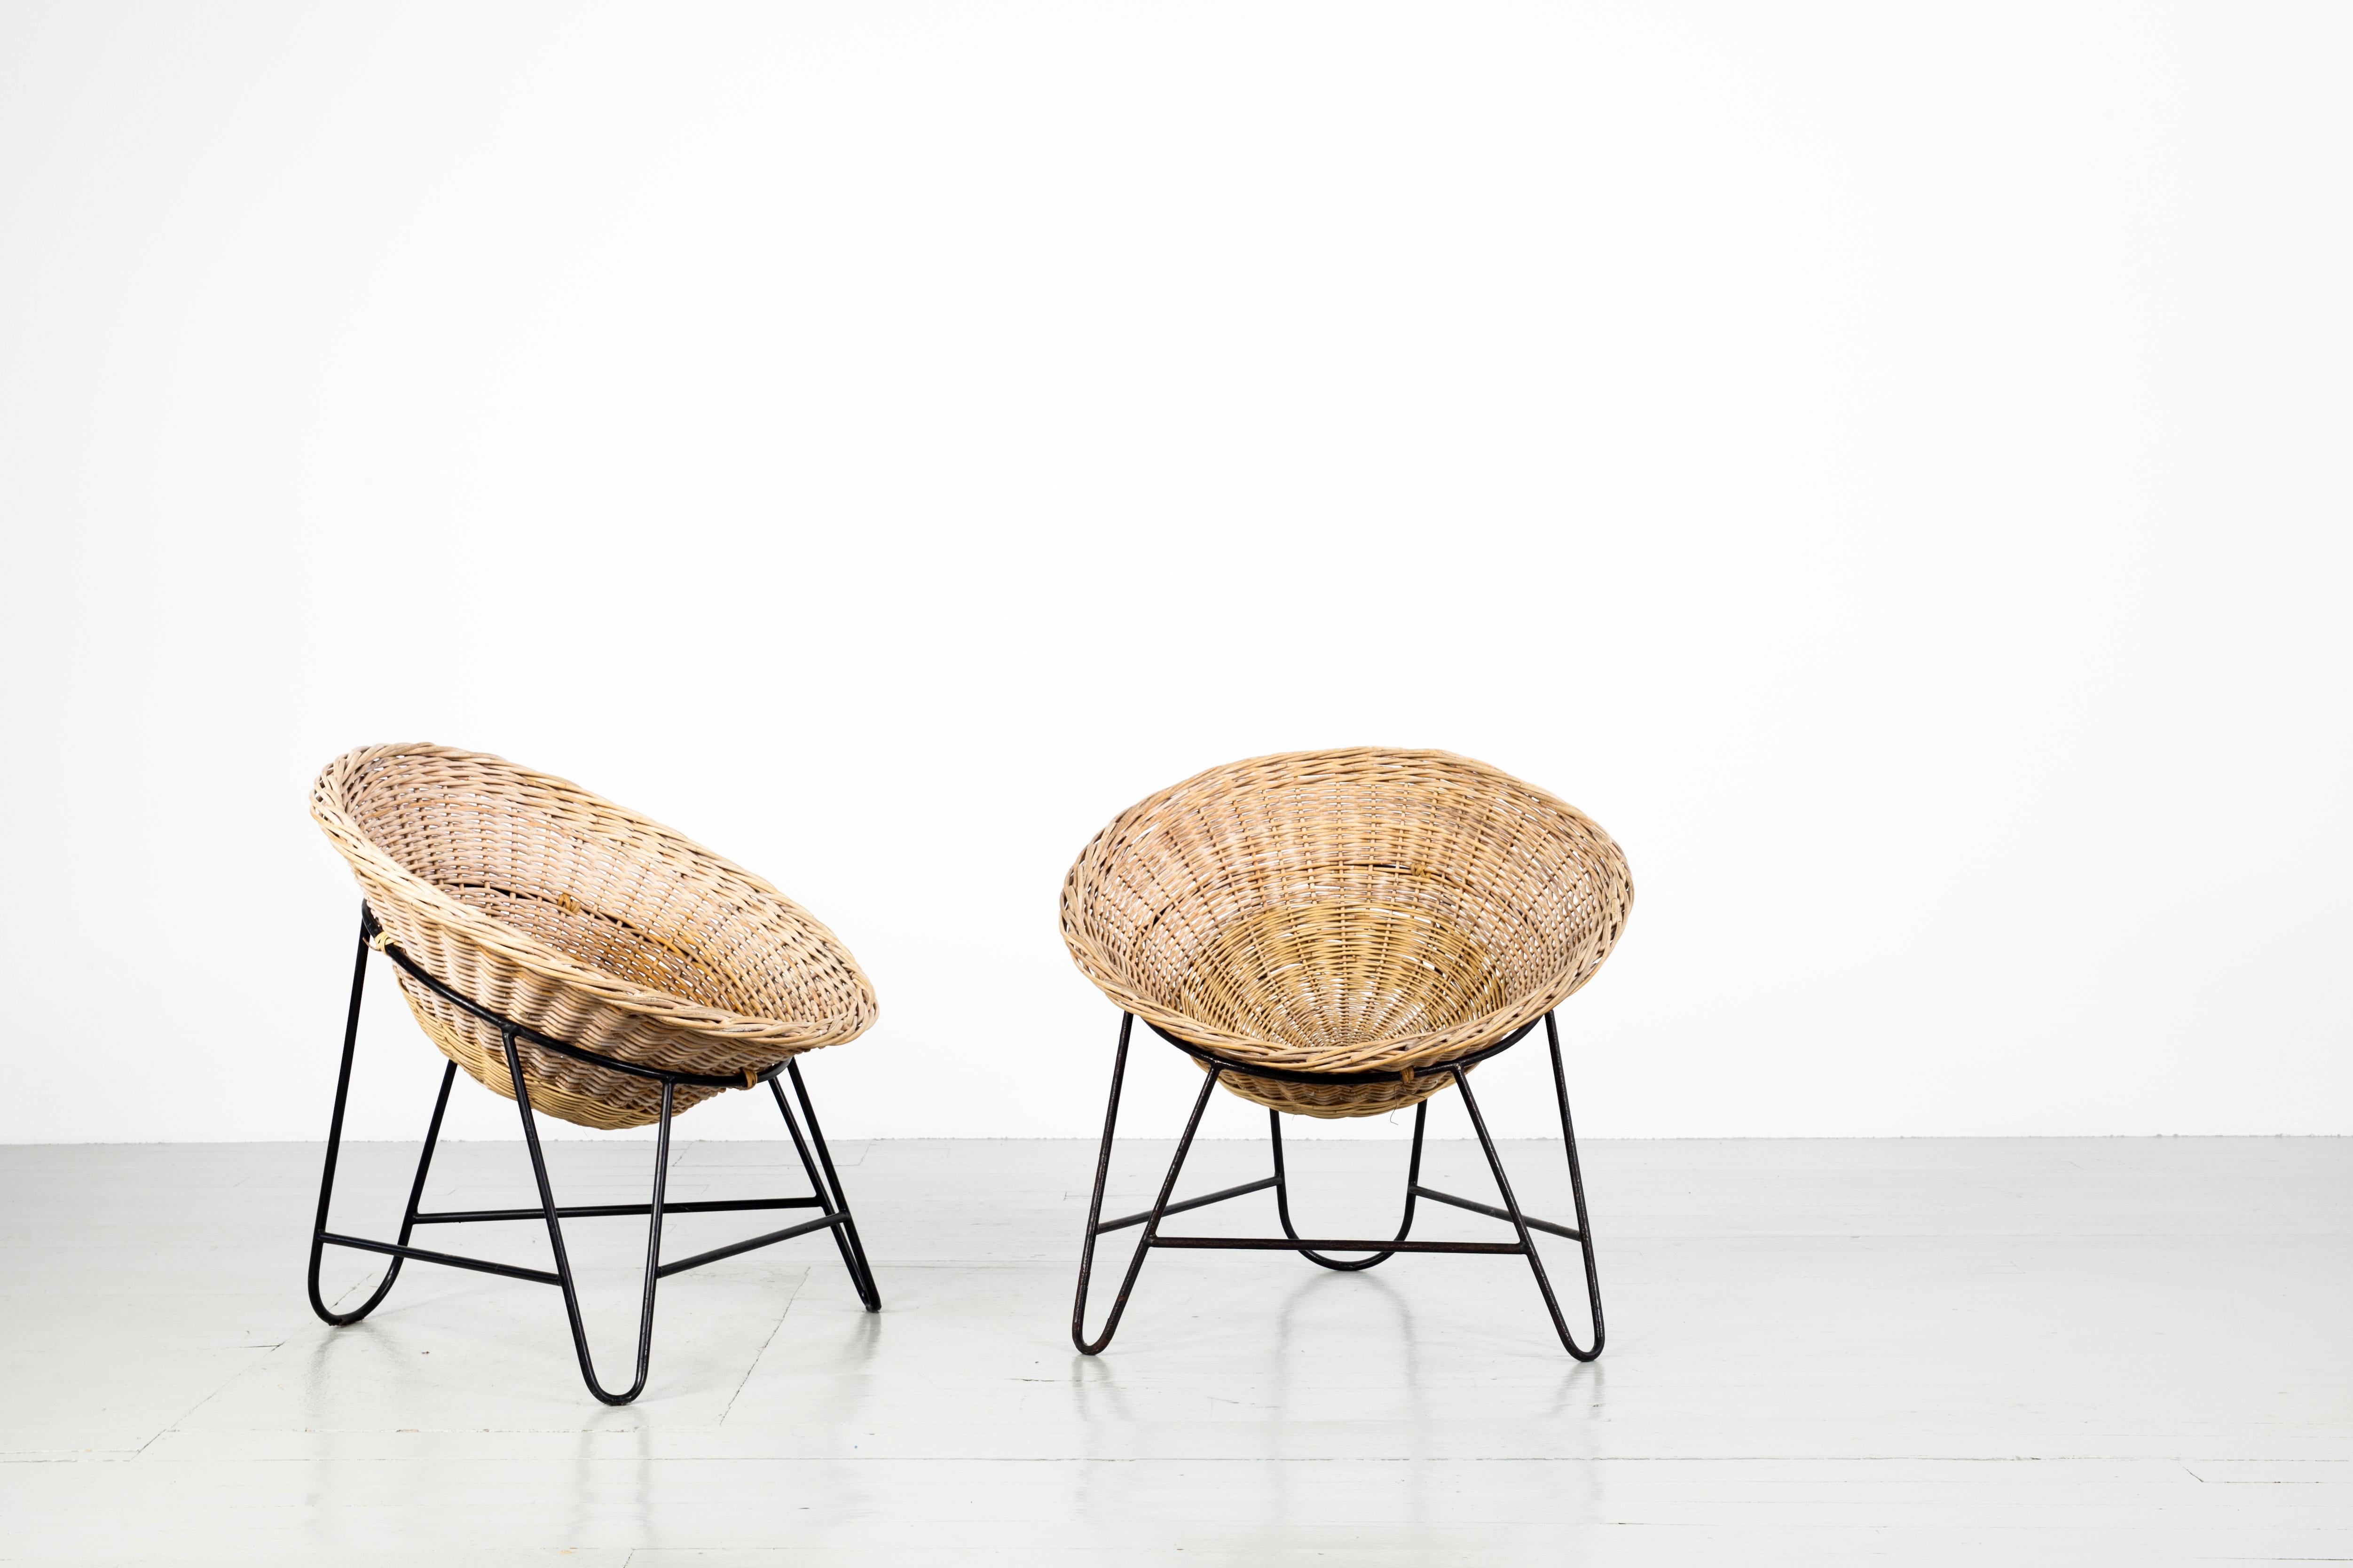 Italian Mid-Century Modern light brown Rattan basket chairs. The chairs are often described as coconut-shaped. They feature a light brown rattan seat shell and a base of lacquered iron. The chairs are in good vintage condition

 